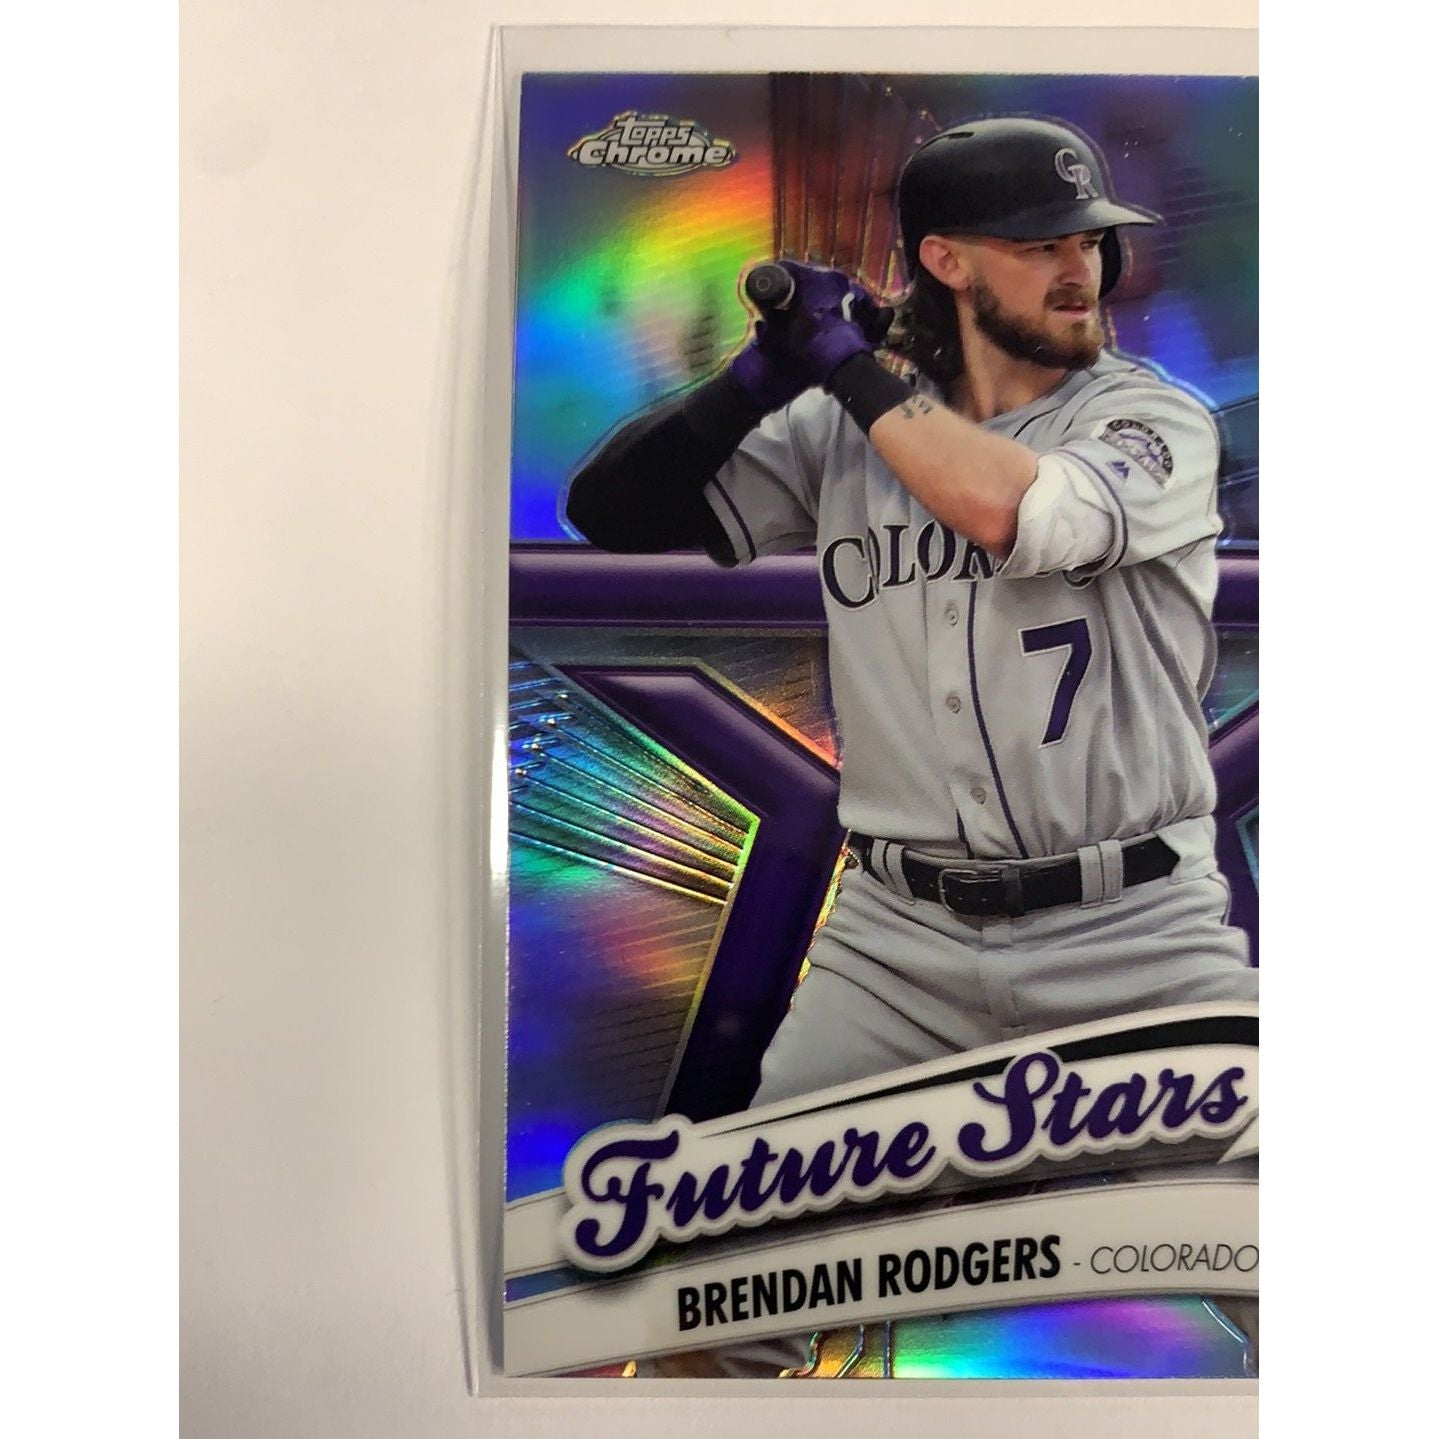  2020 Topps Chrome Brendan Rodgers Future Stars  Local Legends Cards & Collectibles